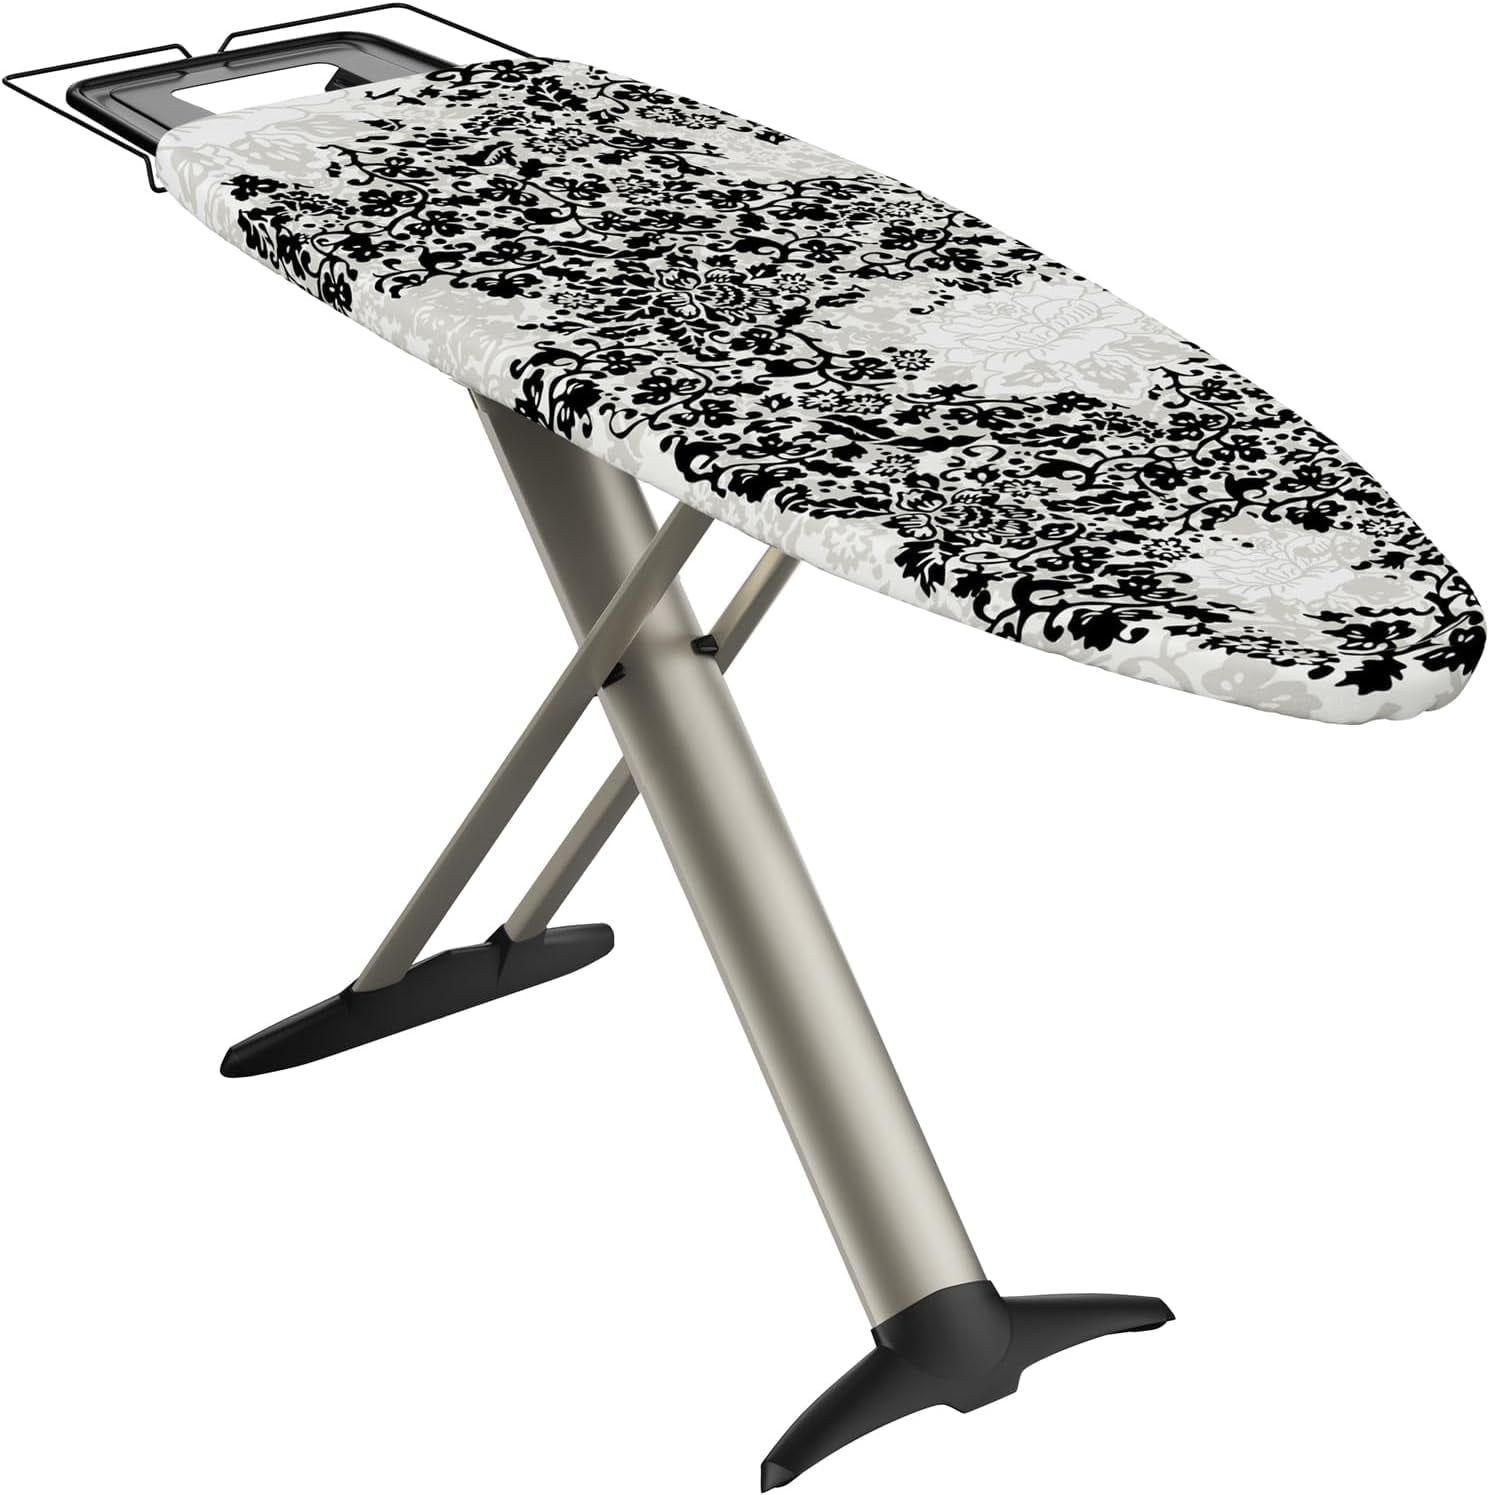 Better Homes & Gardens Wide Top Ironing Board 47.99 x 17.99 